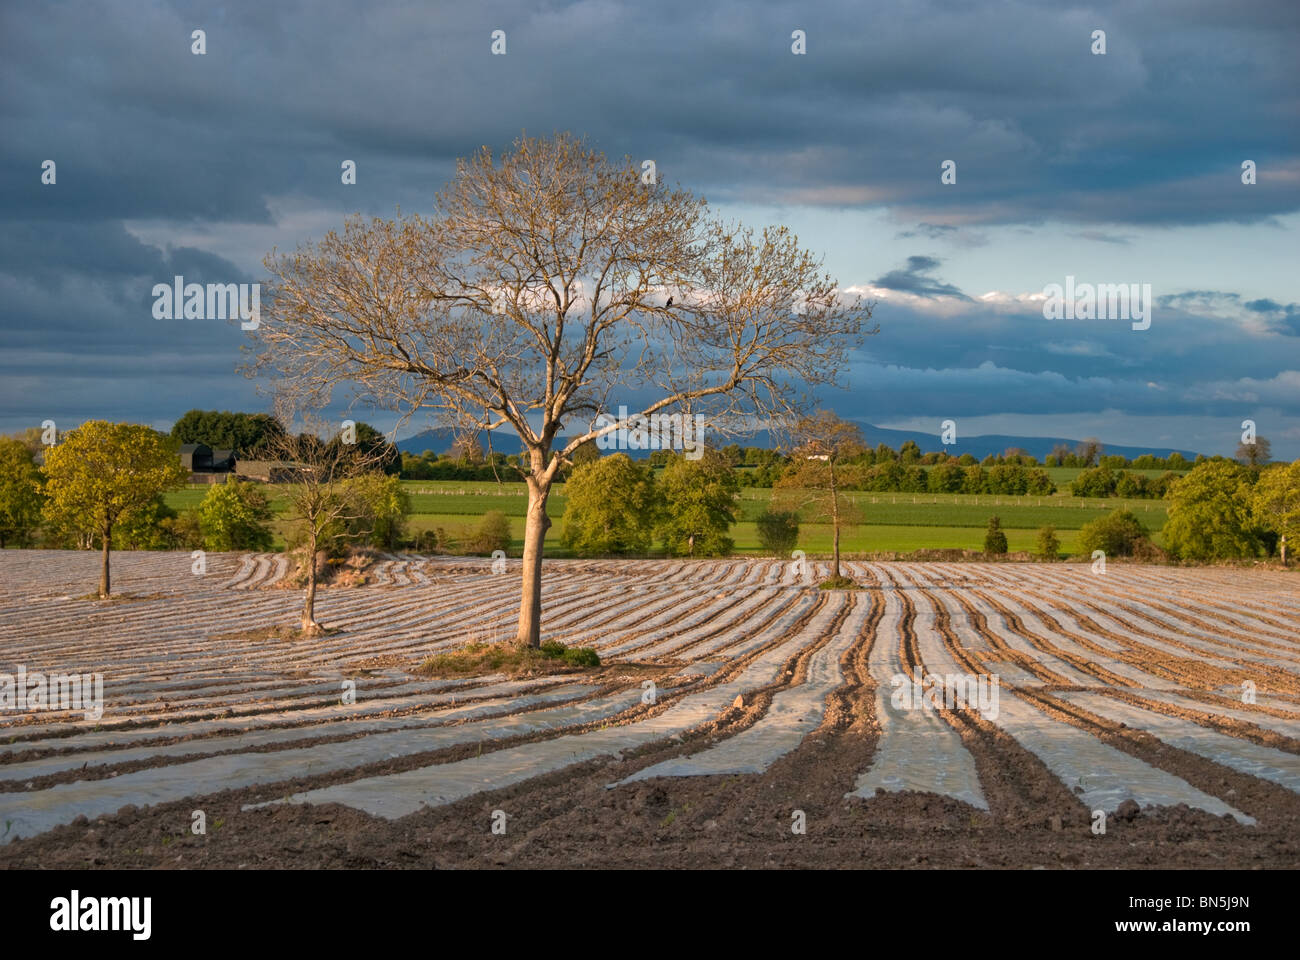 A newly planted field of maize crop. Stock Photo